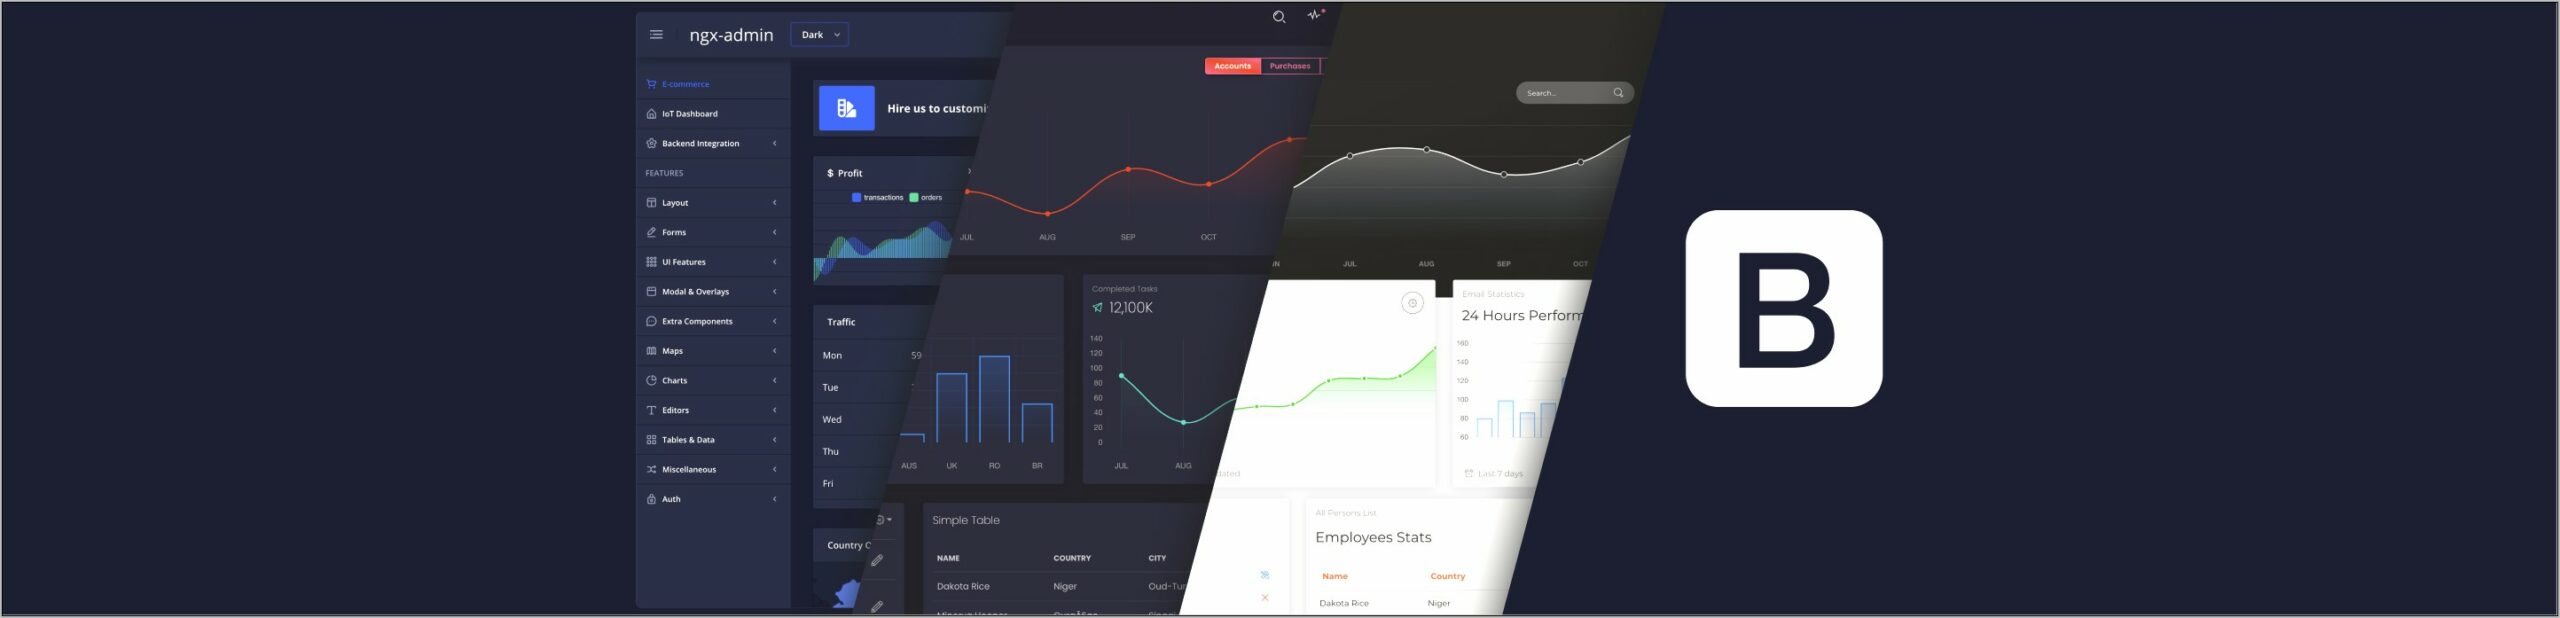 Admin Dashboard Template Bootstrap Free Download